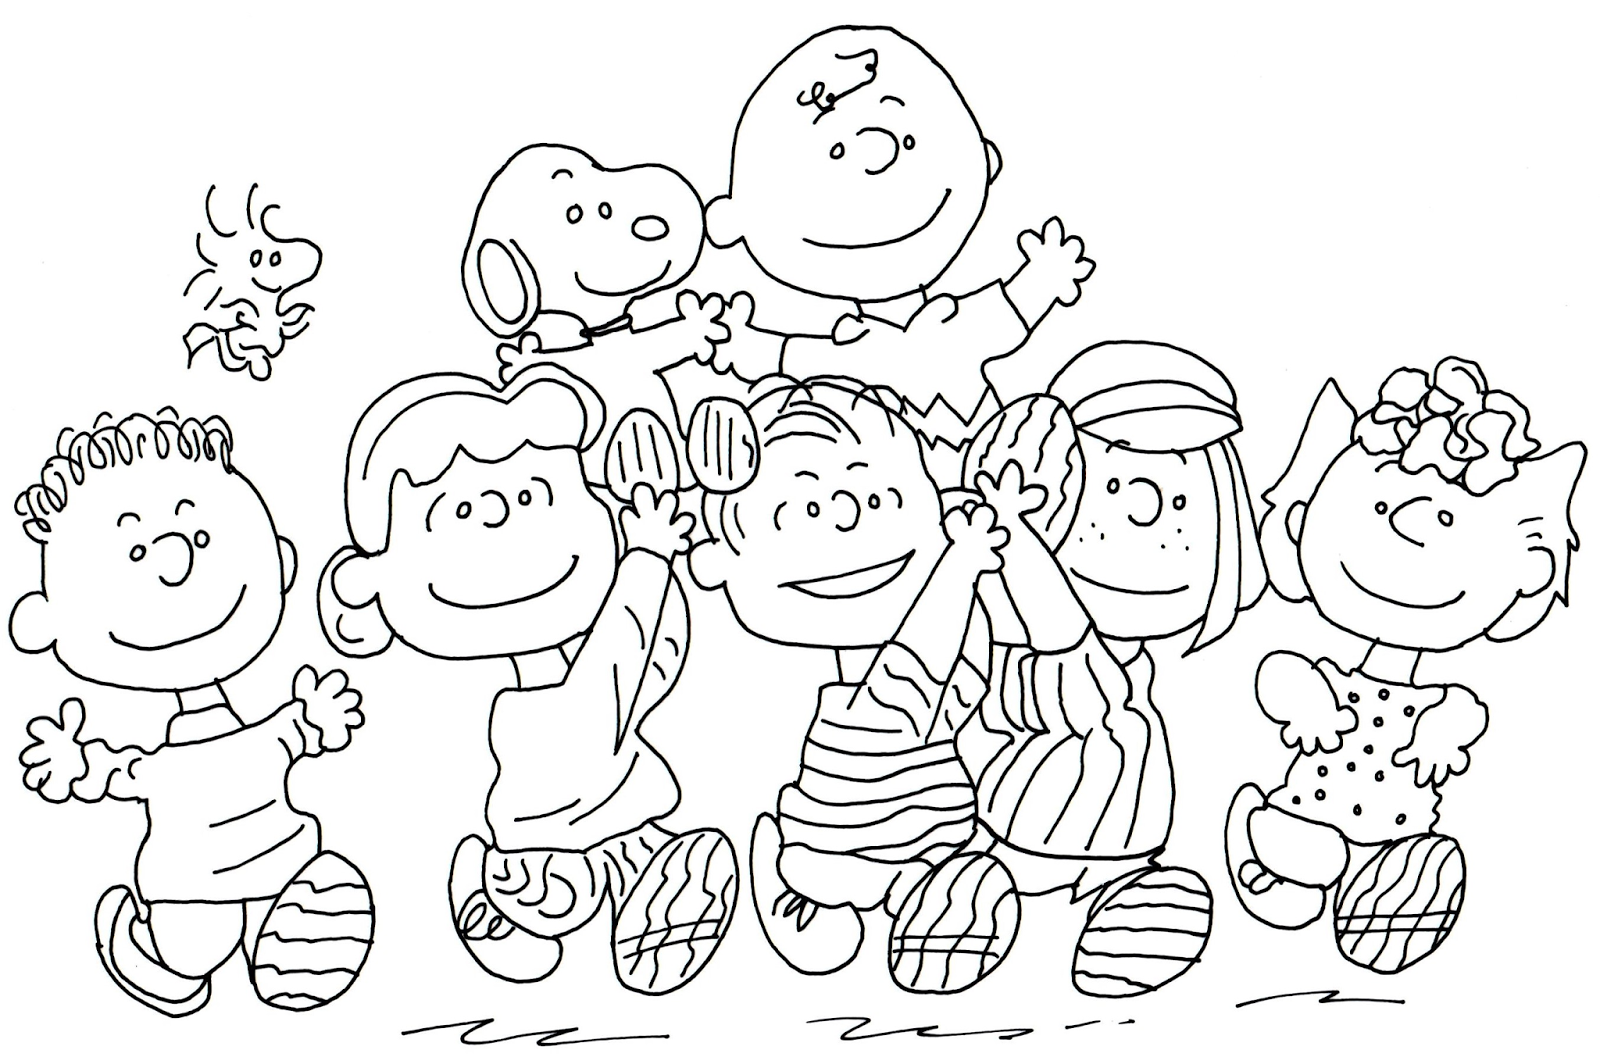 Free Charlie Brown Snoopy and Peanuts Coloring Pages: Free ...